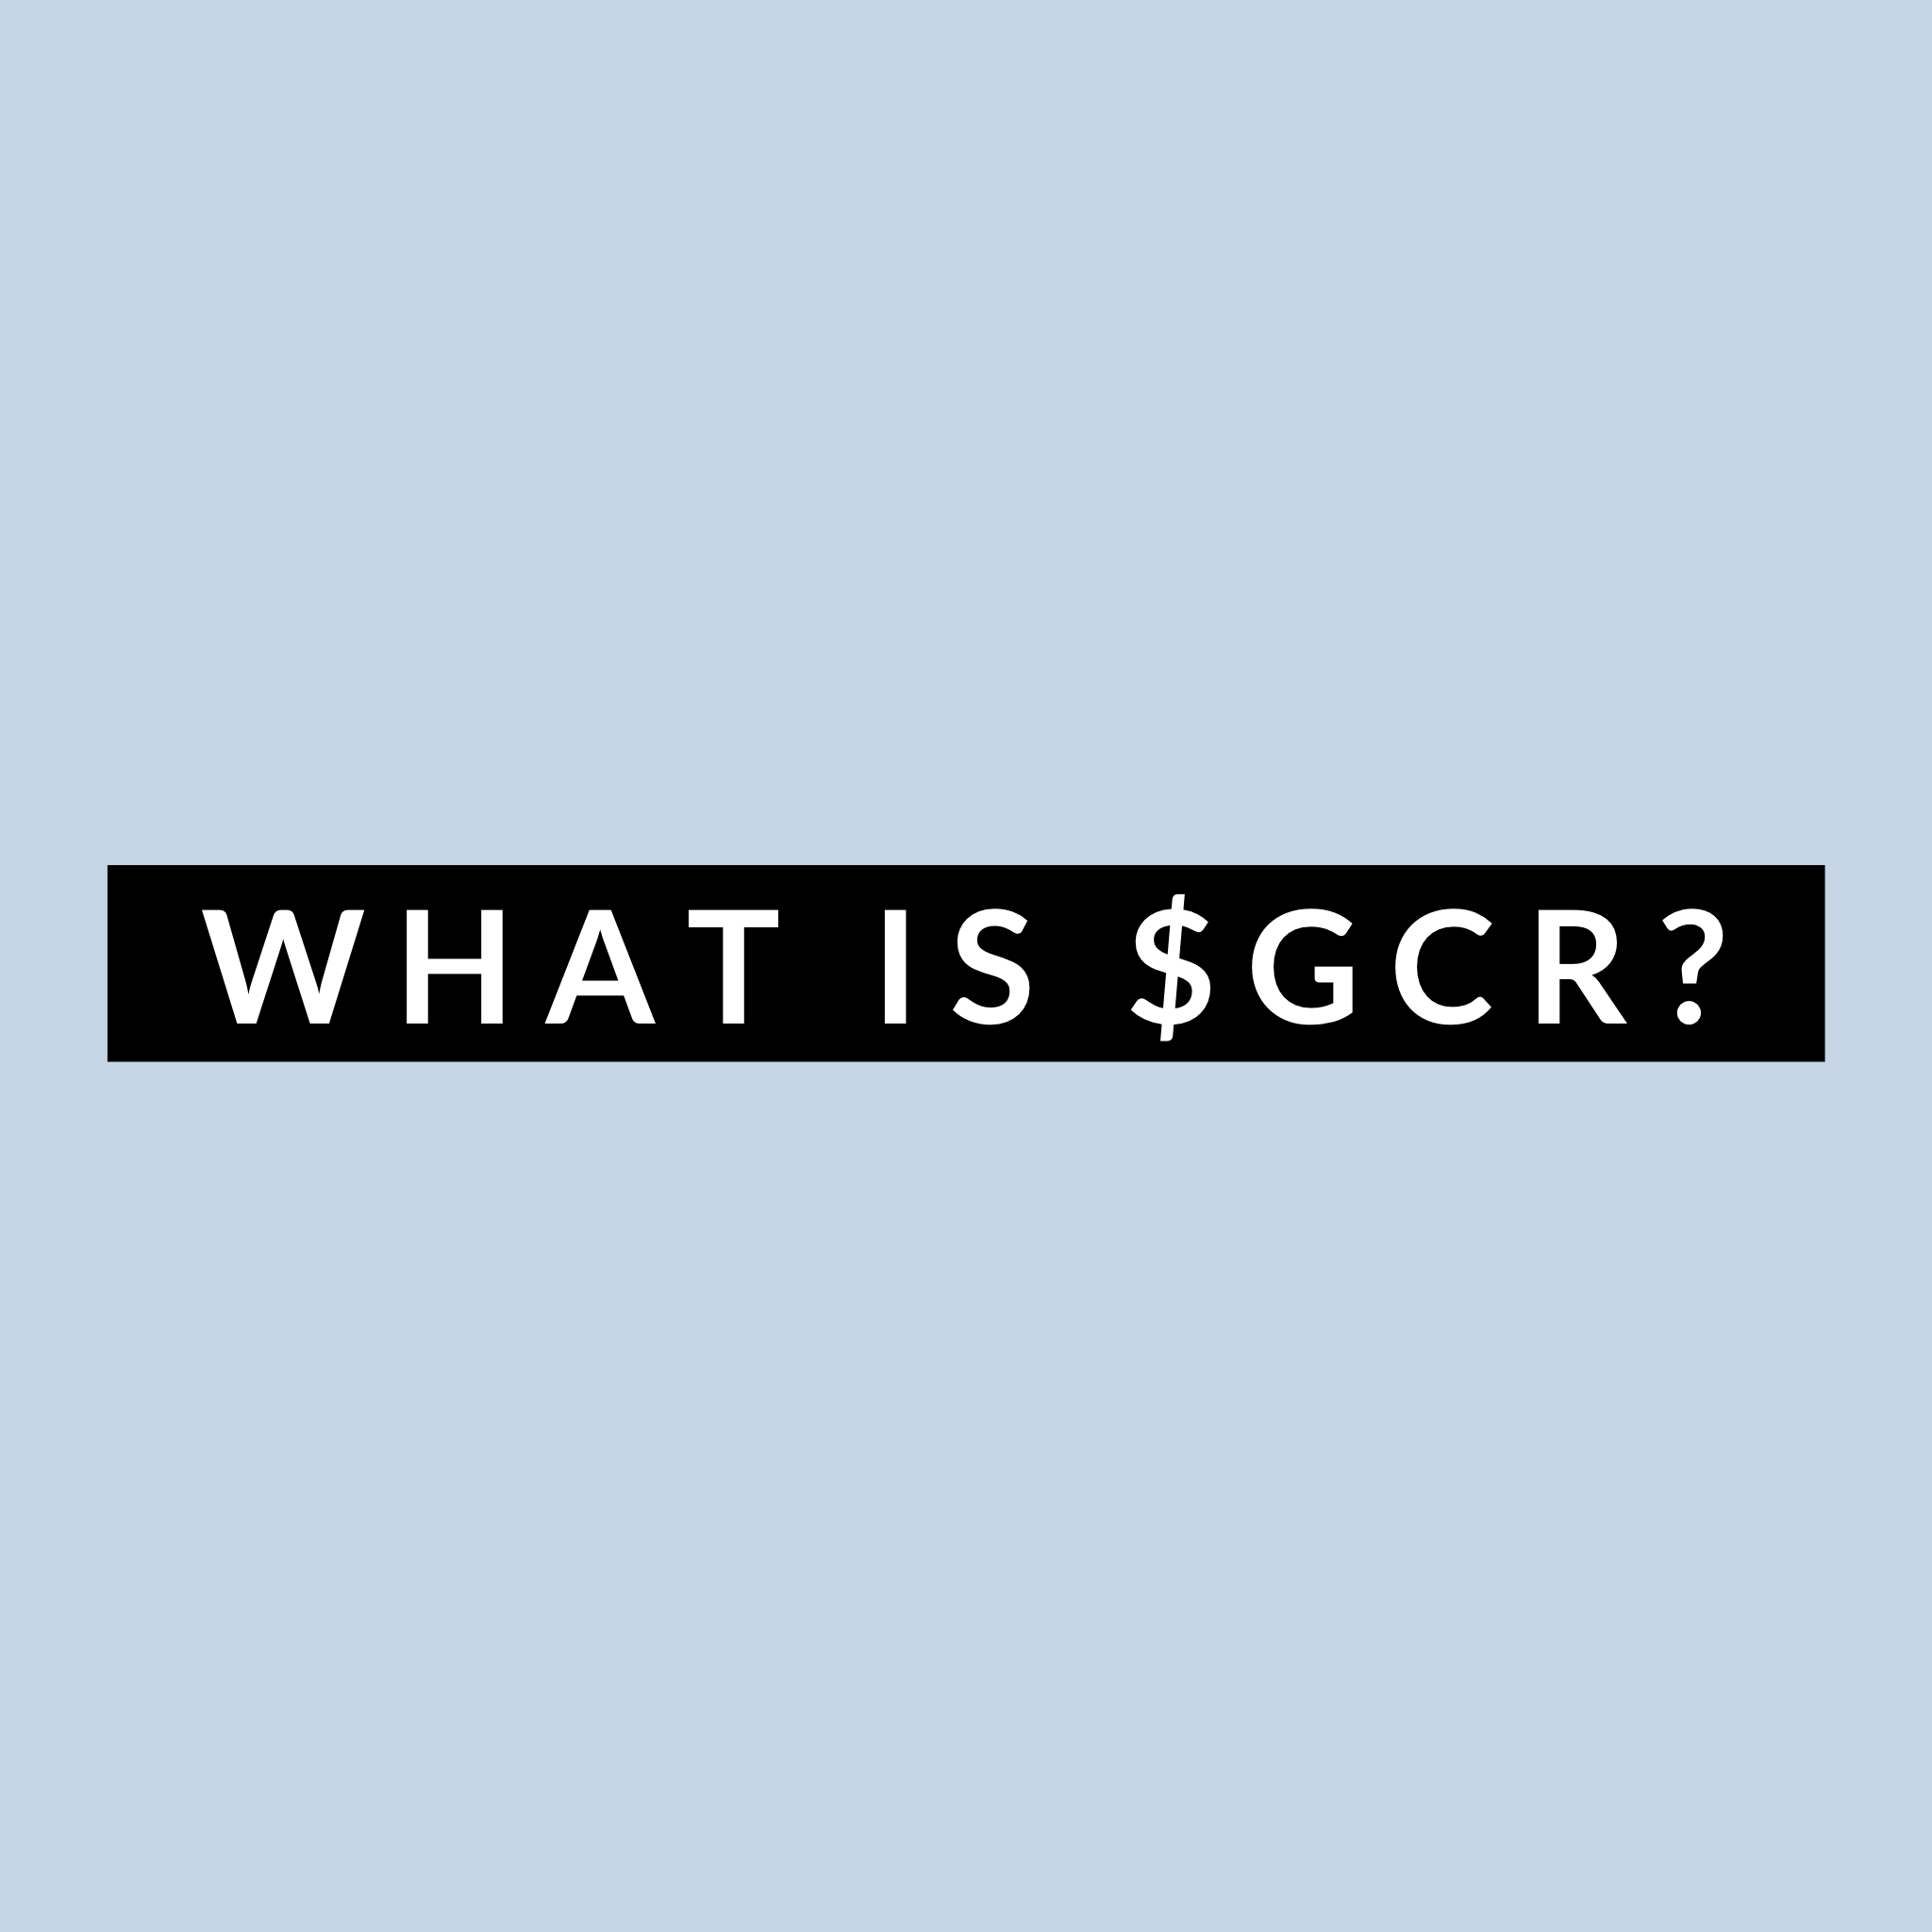 What is $GCR?